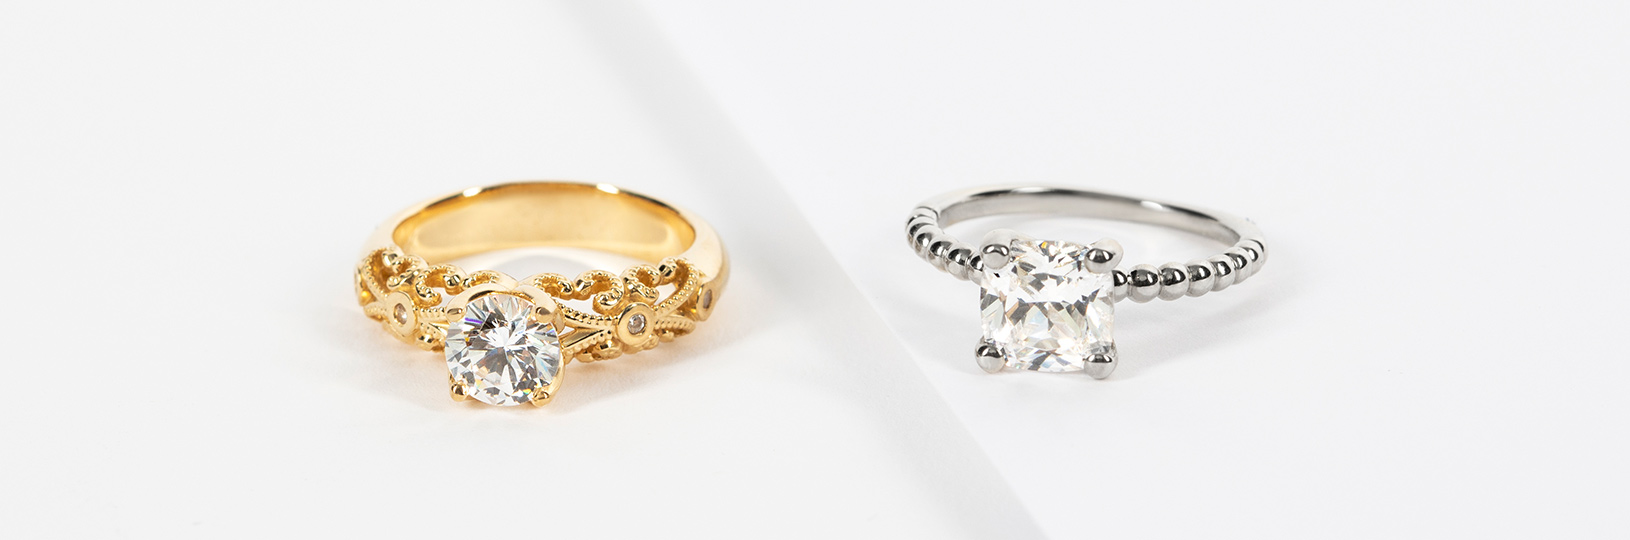 Two of the most popular metals, yellow and white gold both have their pros and cons